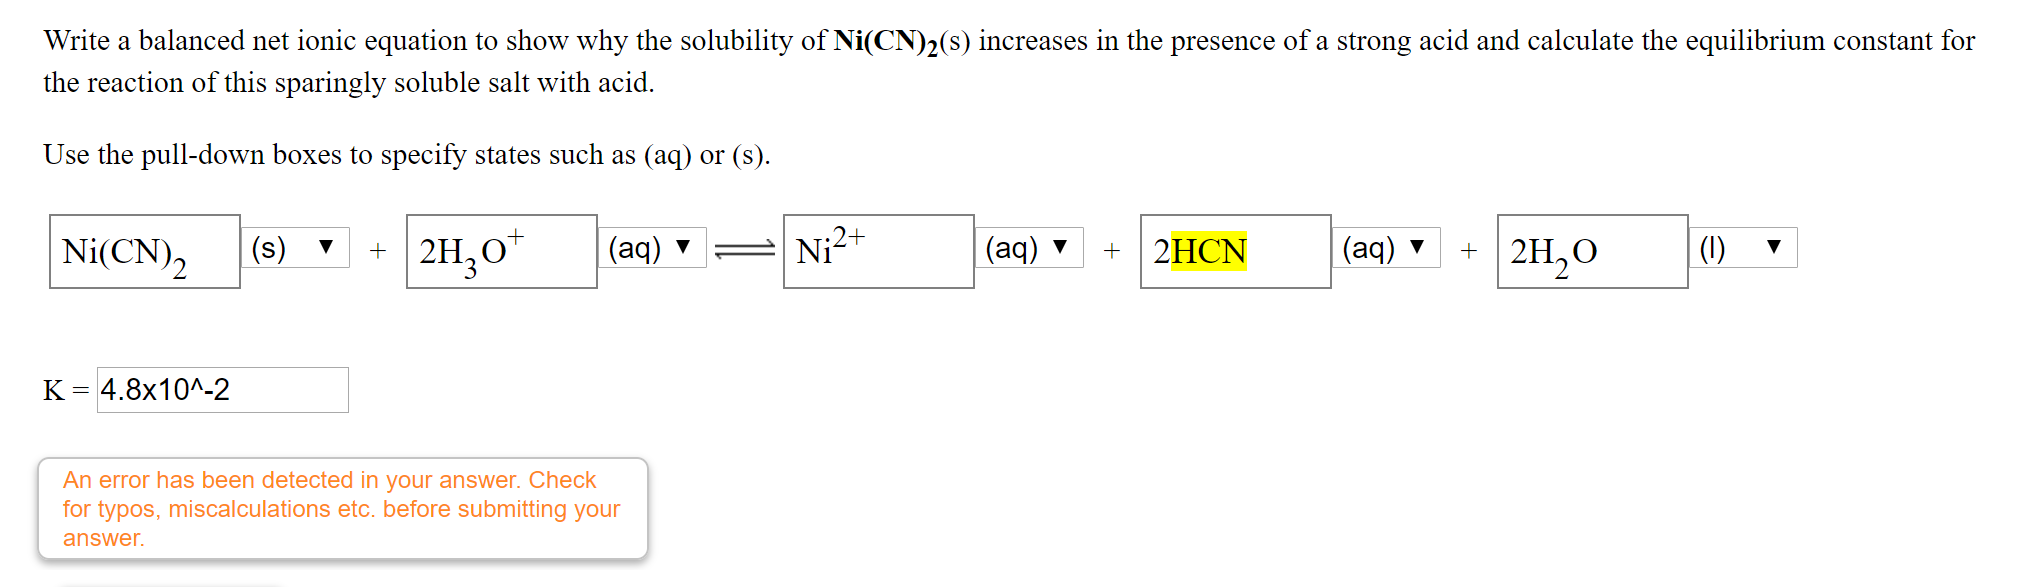 Write a balanced net ionic equation to show why the solubility of Ni(CN)2(s) increases in the presence of a strong acid and calculate the equilibrium constant for
the reaction of this sparingly soluble salt with acid.
Use the pull-down boxes to specify states such as (aq) or (s).
Ni(CN),
2H,O*
Ni2+
+ 2H,0
|(1)
(s)
(aq) ▼
(aq) ▼
2HCN
(aq) ▼
K = 4.8x10^-2
An error has been detected in your answer. Check
for typos, miscalculations etc. before submitting your
answer.
